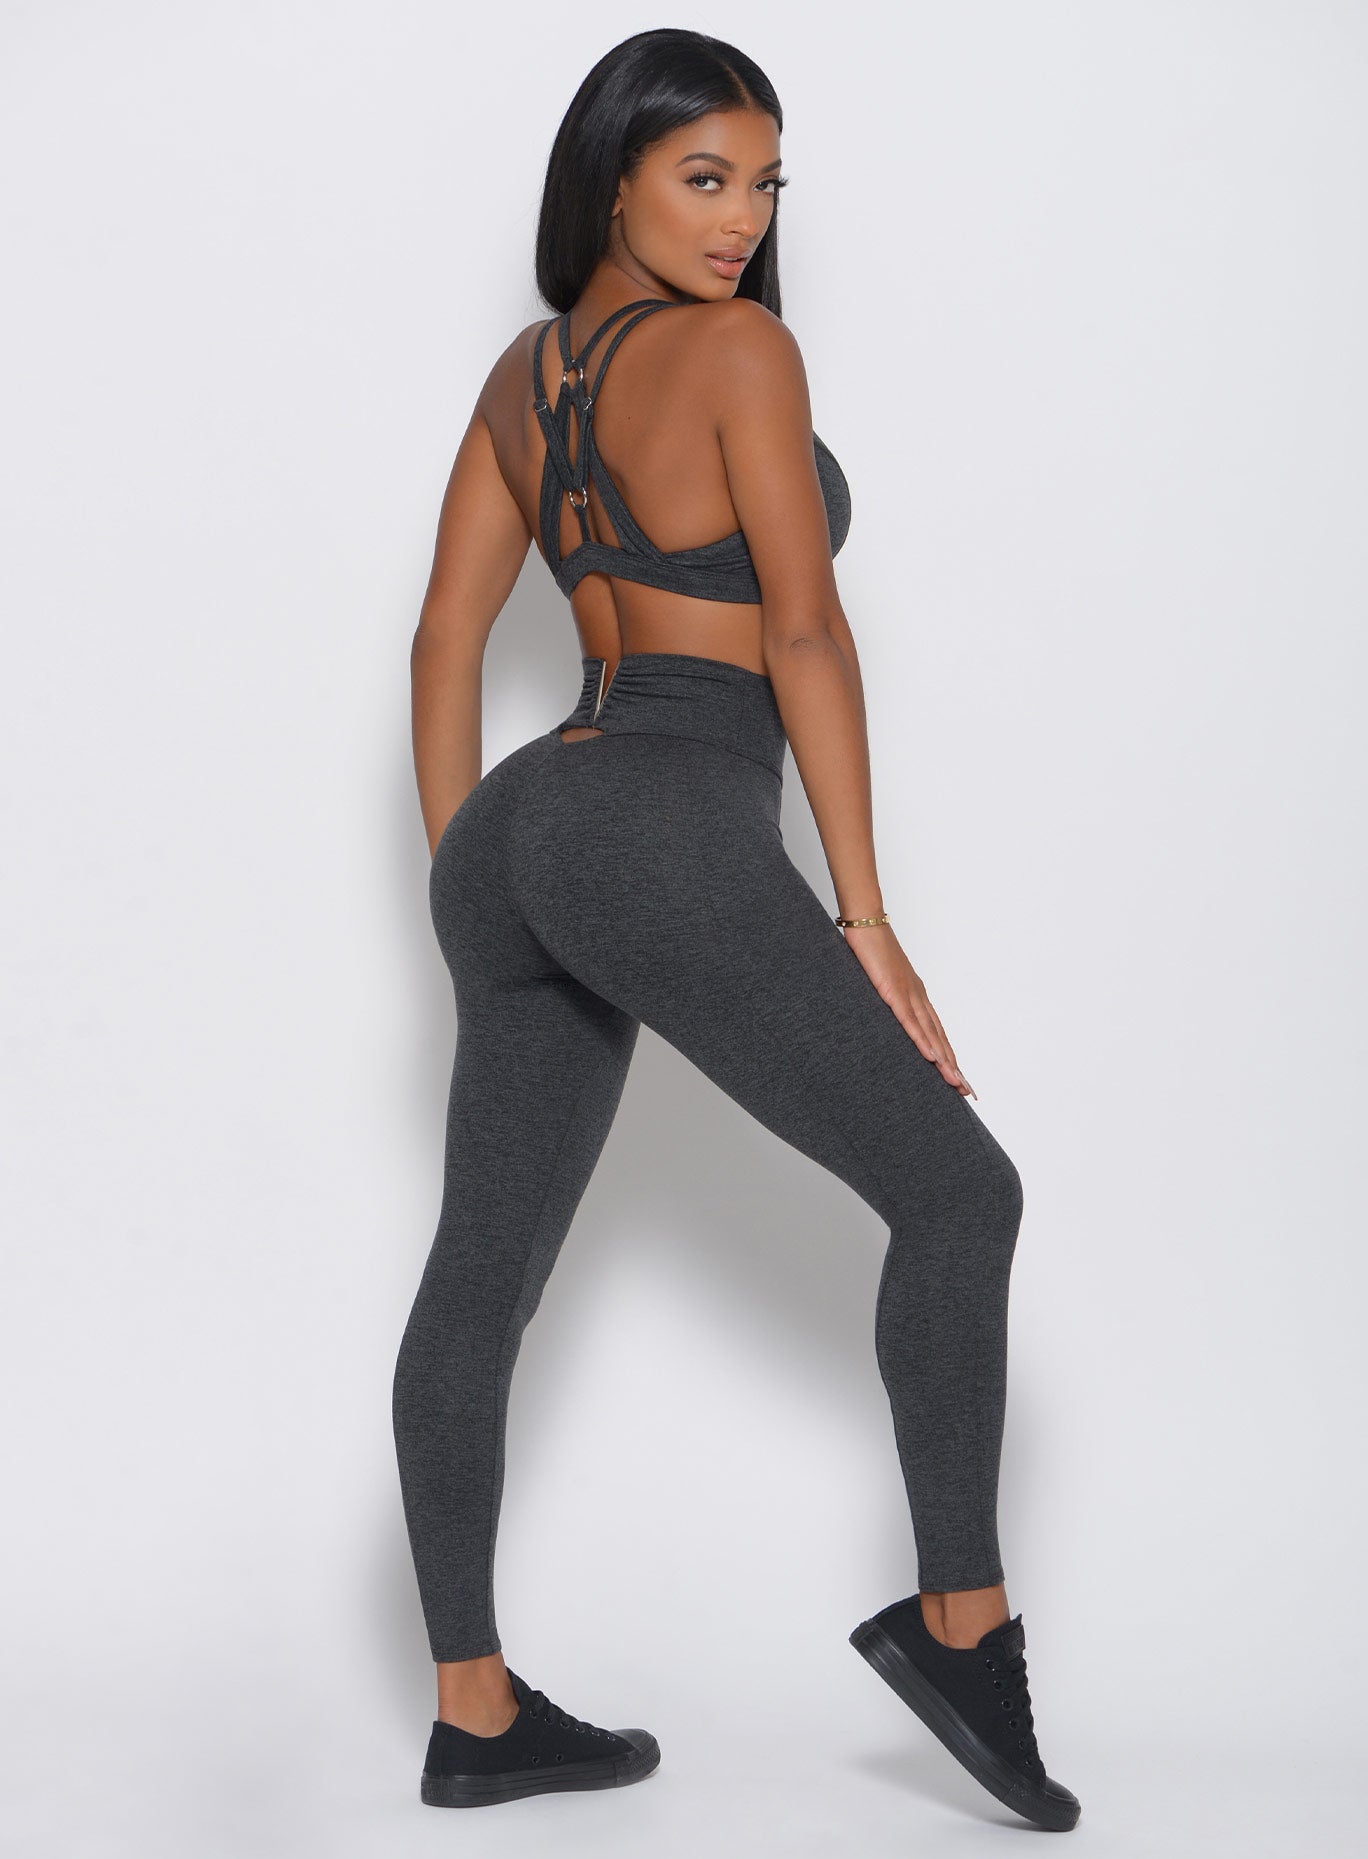 Back view of the model in a high waist gray leggings with a V back design